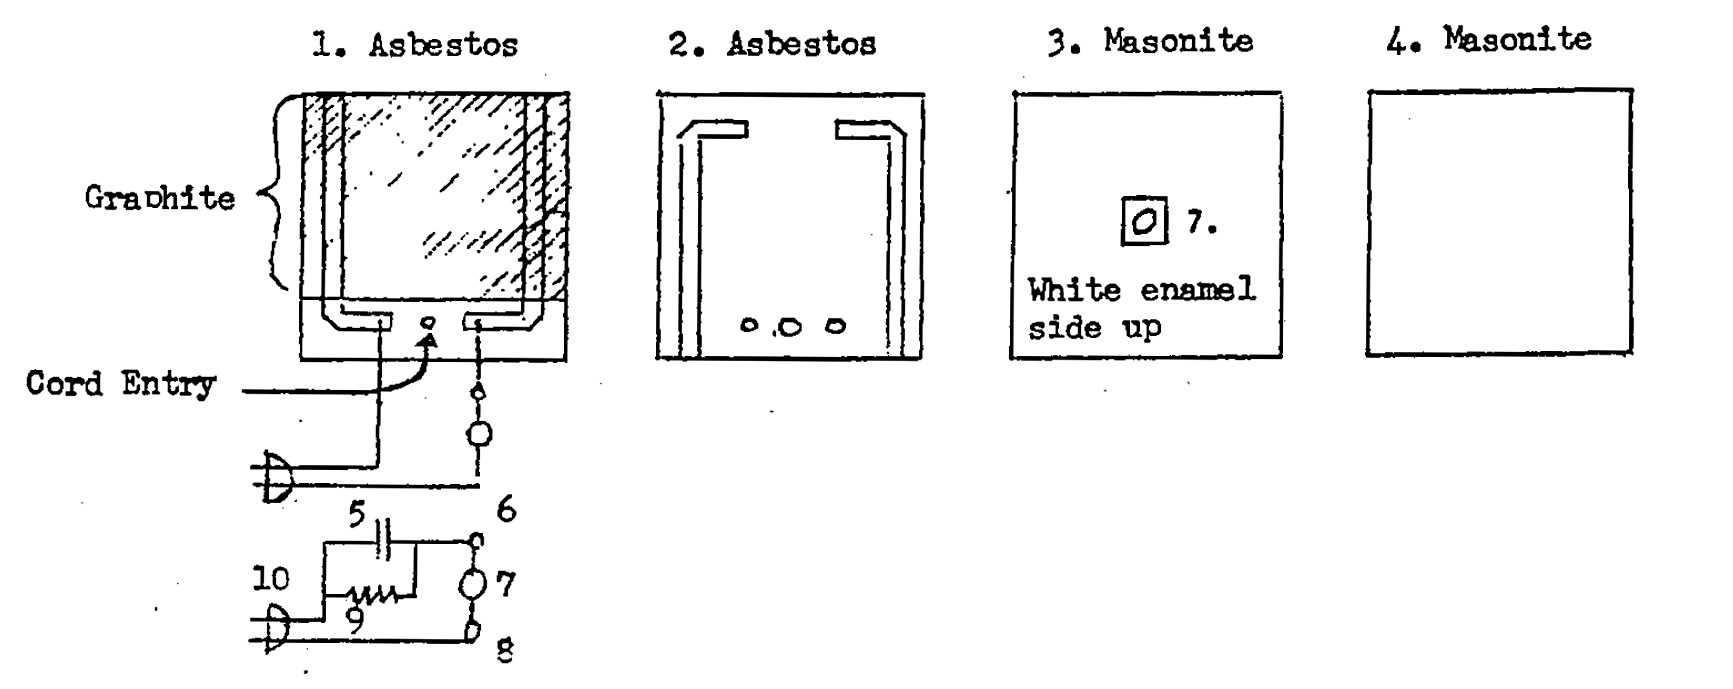 Diagram of the Scribner Solarama Board, provided by Dr. A.N. Onymous.